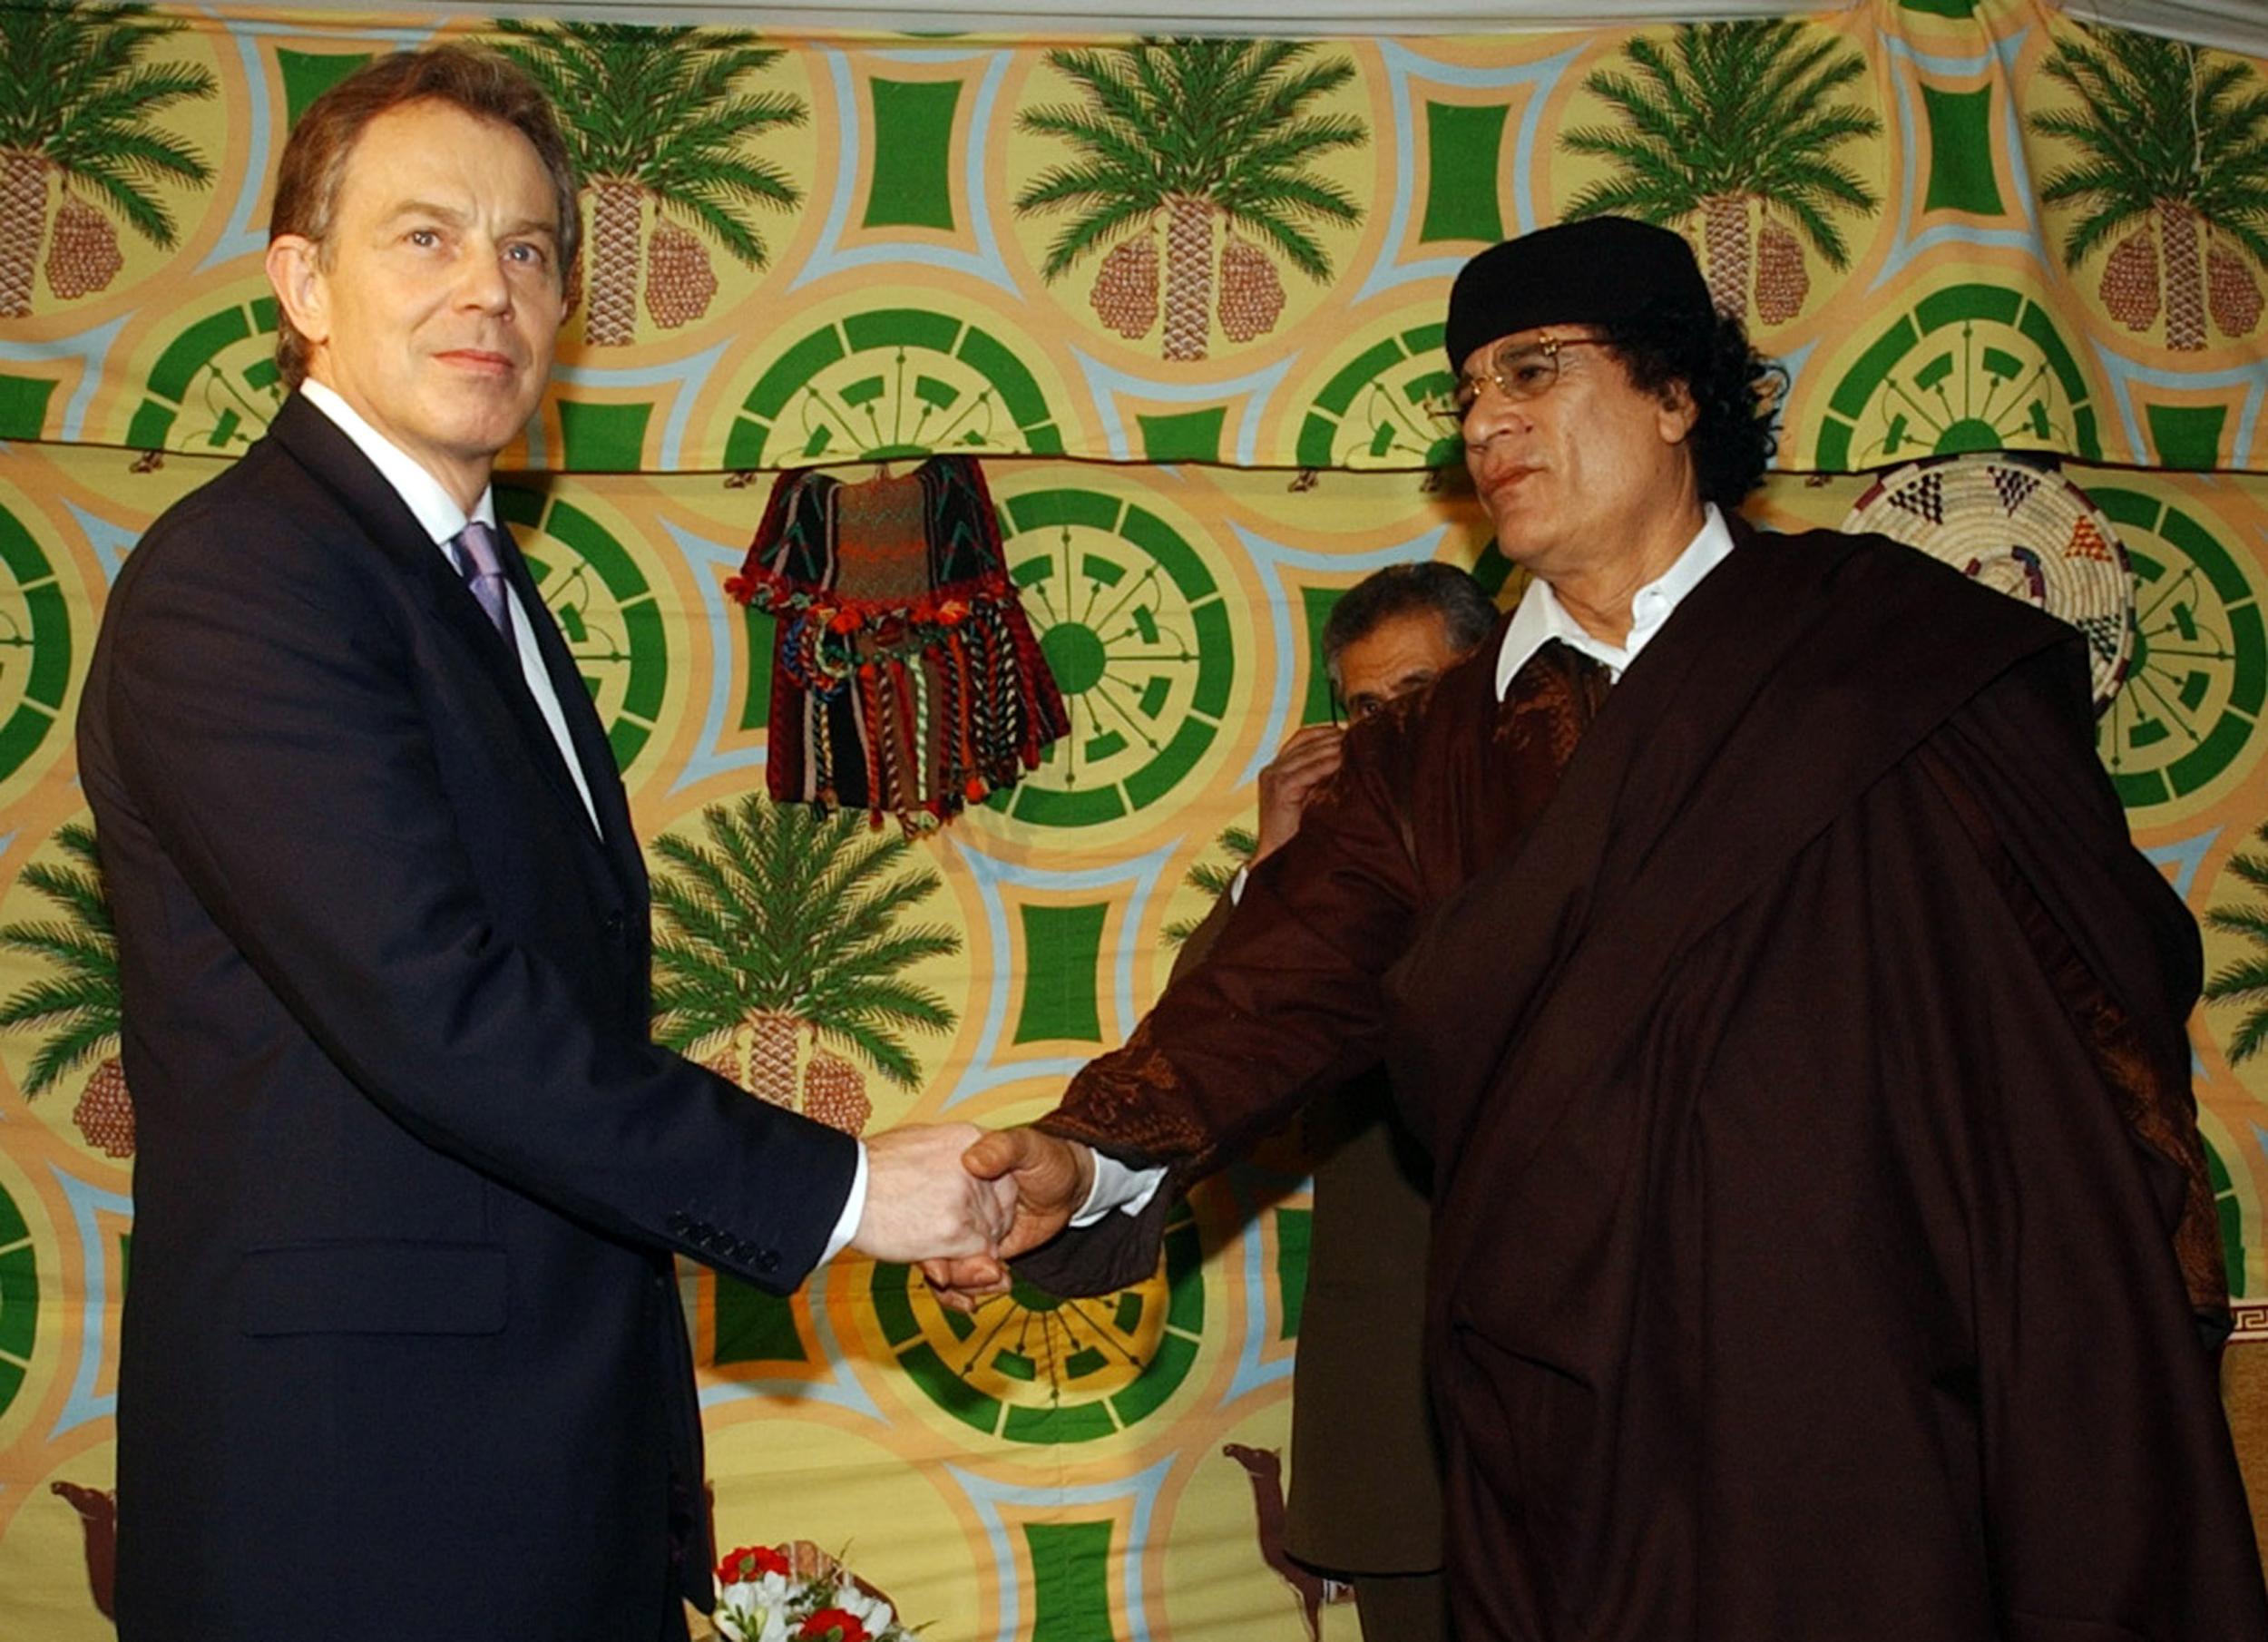 March 2004: The Deal in the Desert